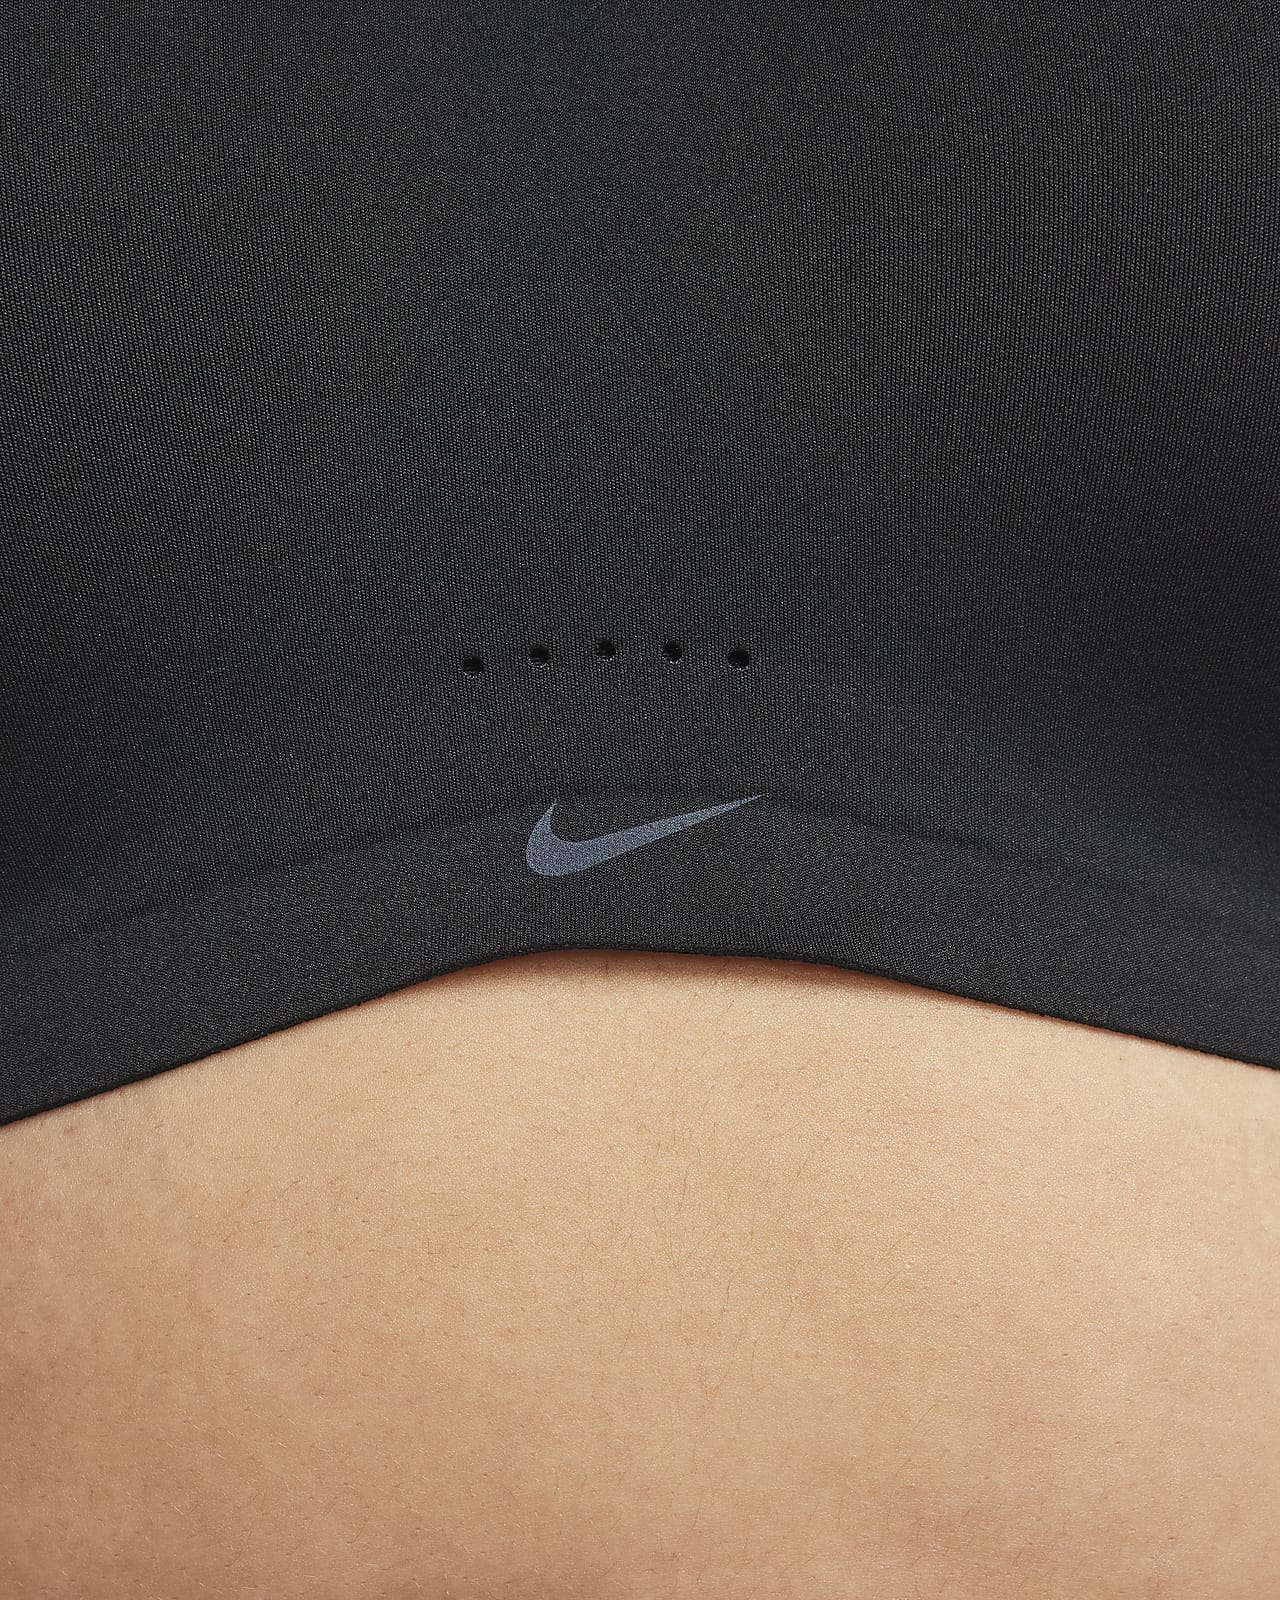 Stay stylish and comfortable with Nike Women's Retro Sports Bra